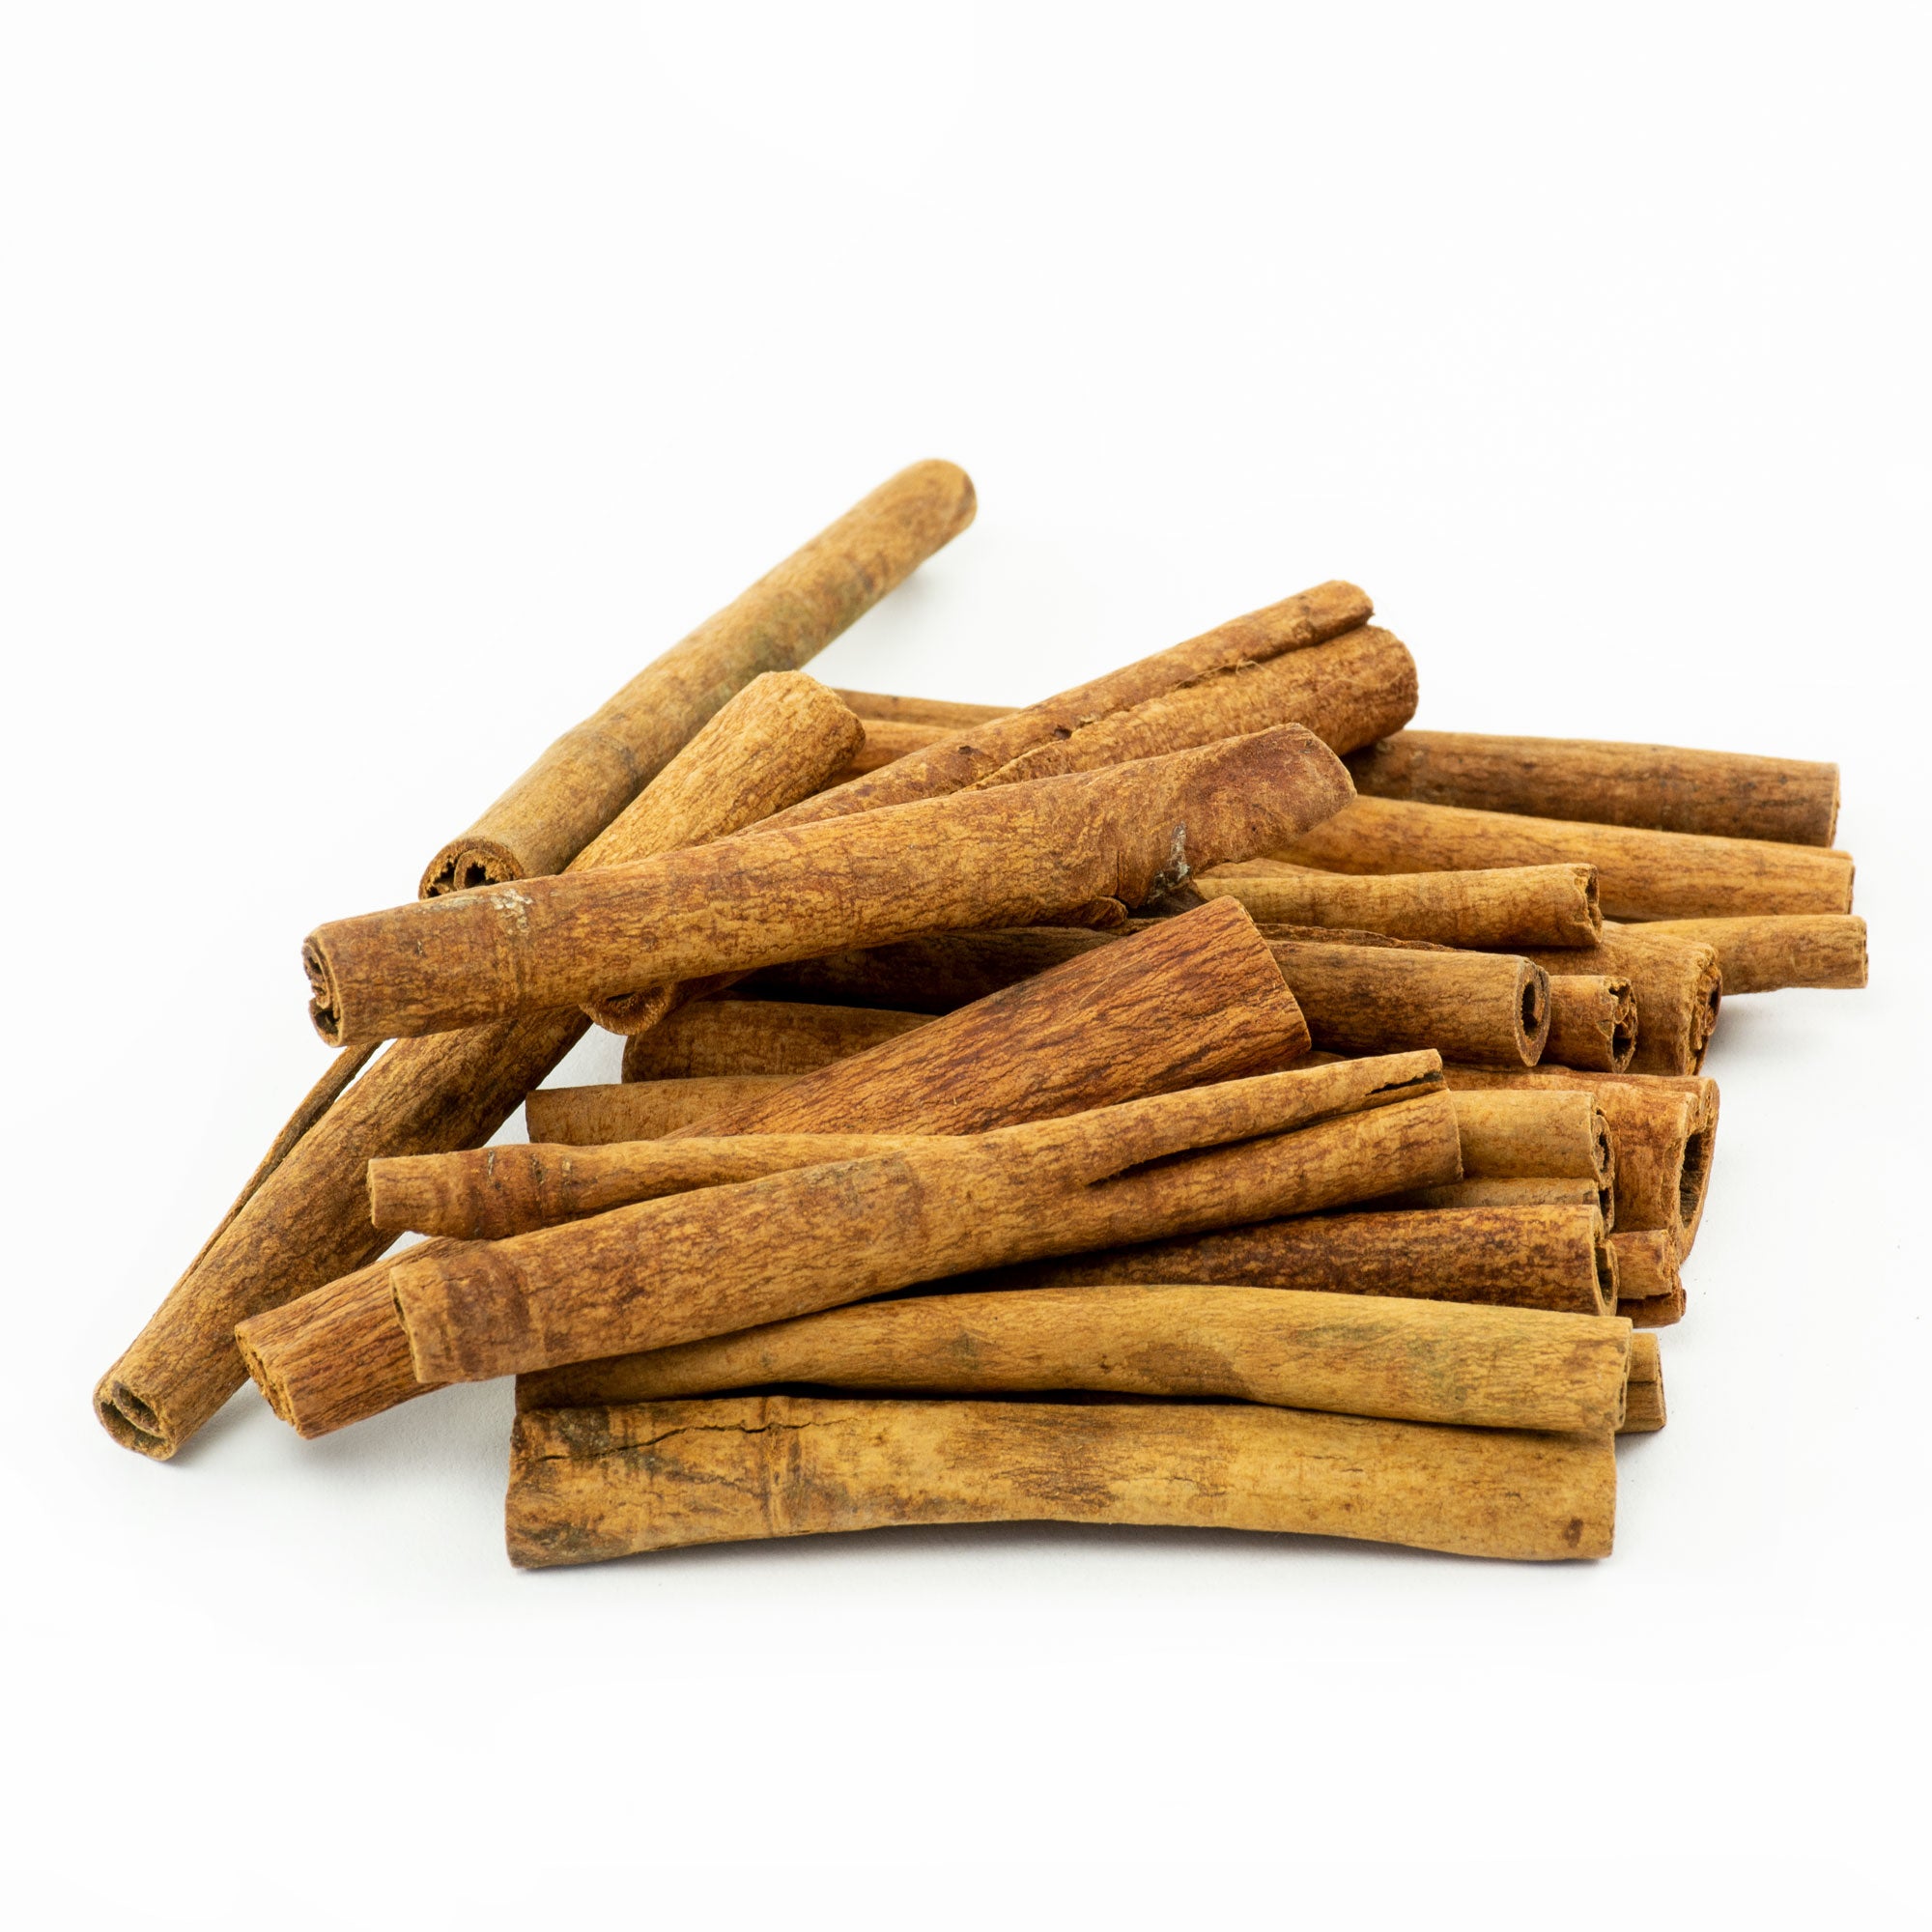 This image shows a 1kg pack of dried cinnamon sticks against a white background